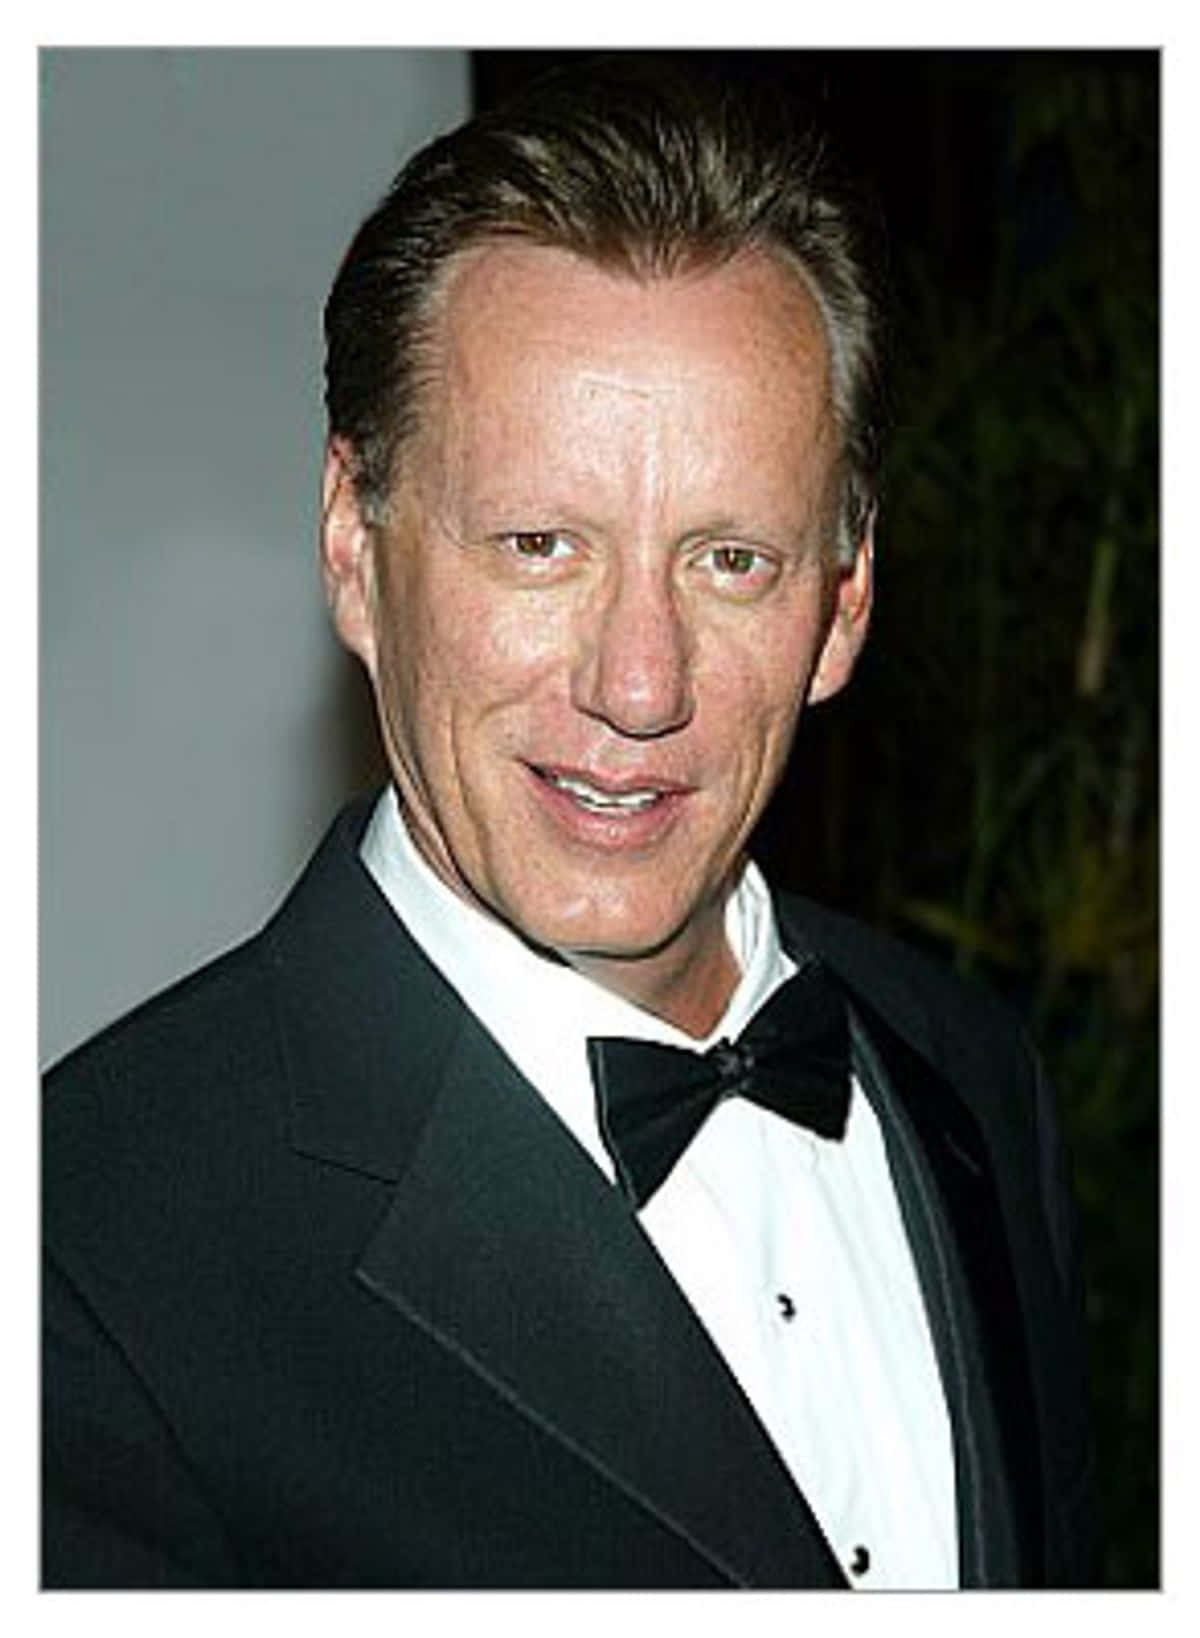 Jameswoods Is An American Actor, Voice Actor, And Producer. He Has Worked In Movies, Television Series, And Theater Plays. In Addition To His Acting Career, Woods Is Also Known For His Conservative Political Views And Activism. Fondo de pantalla